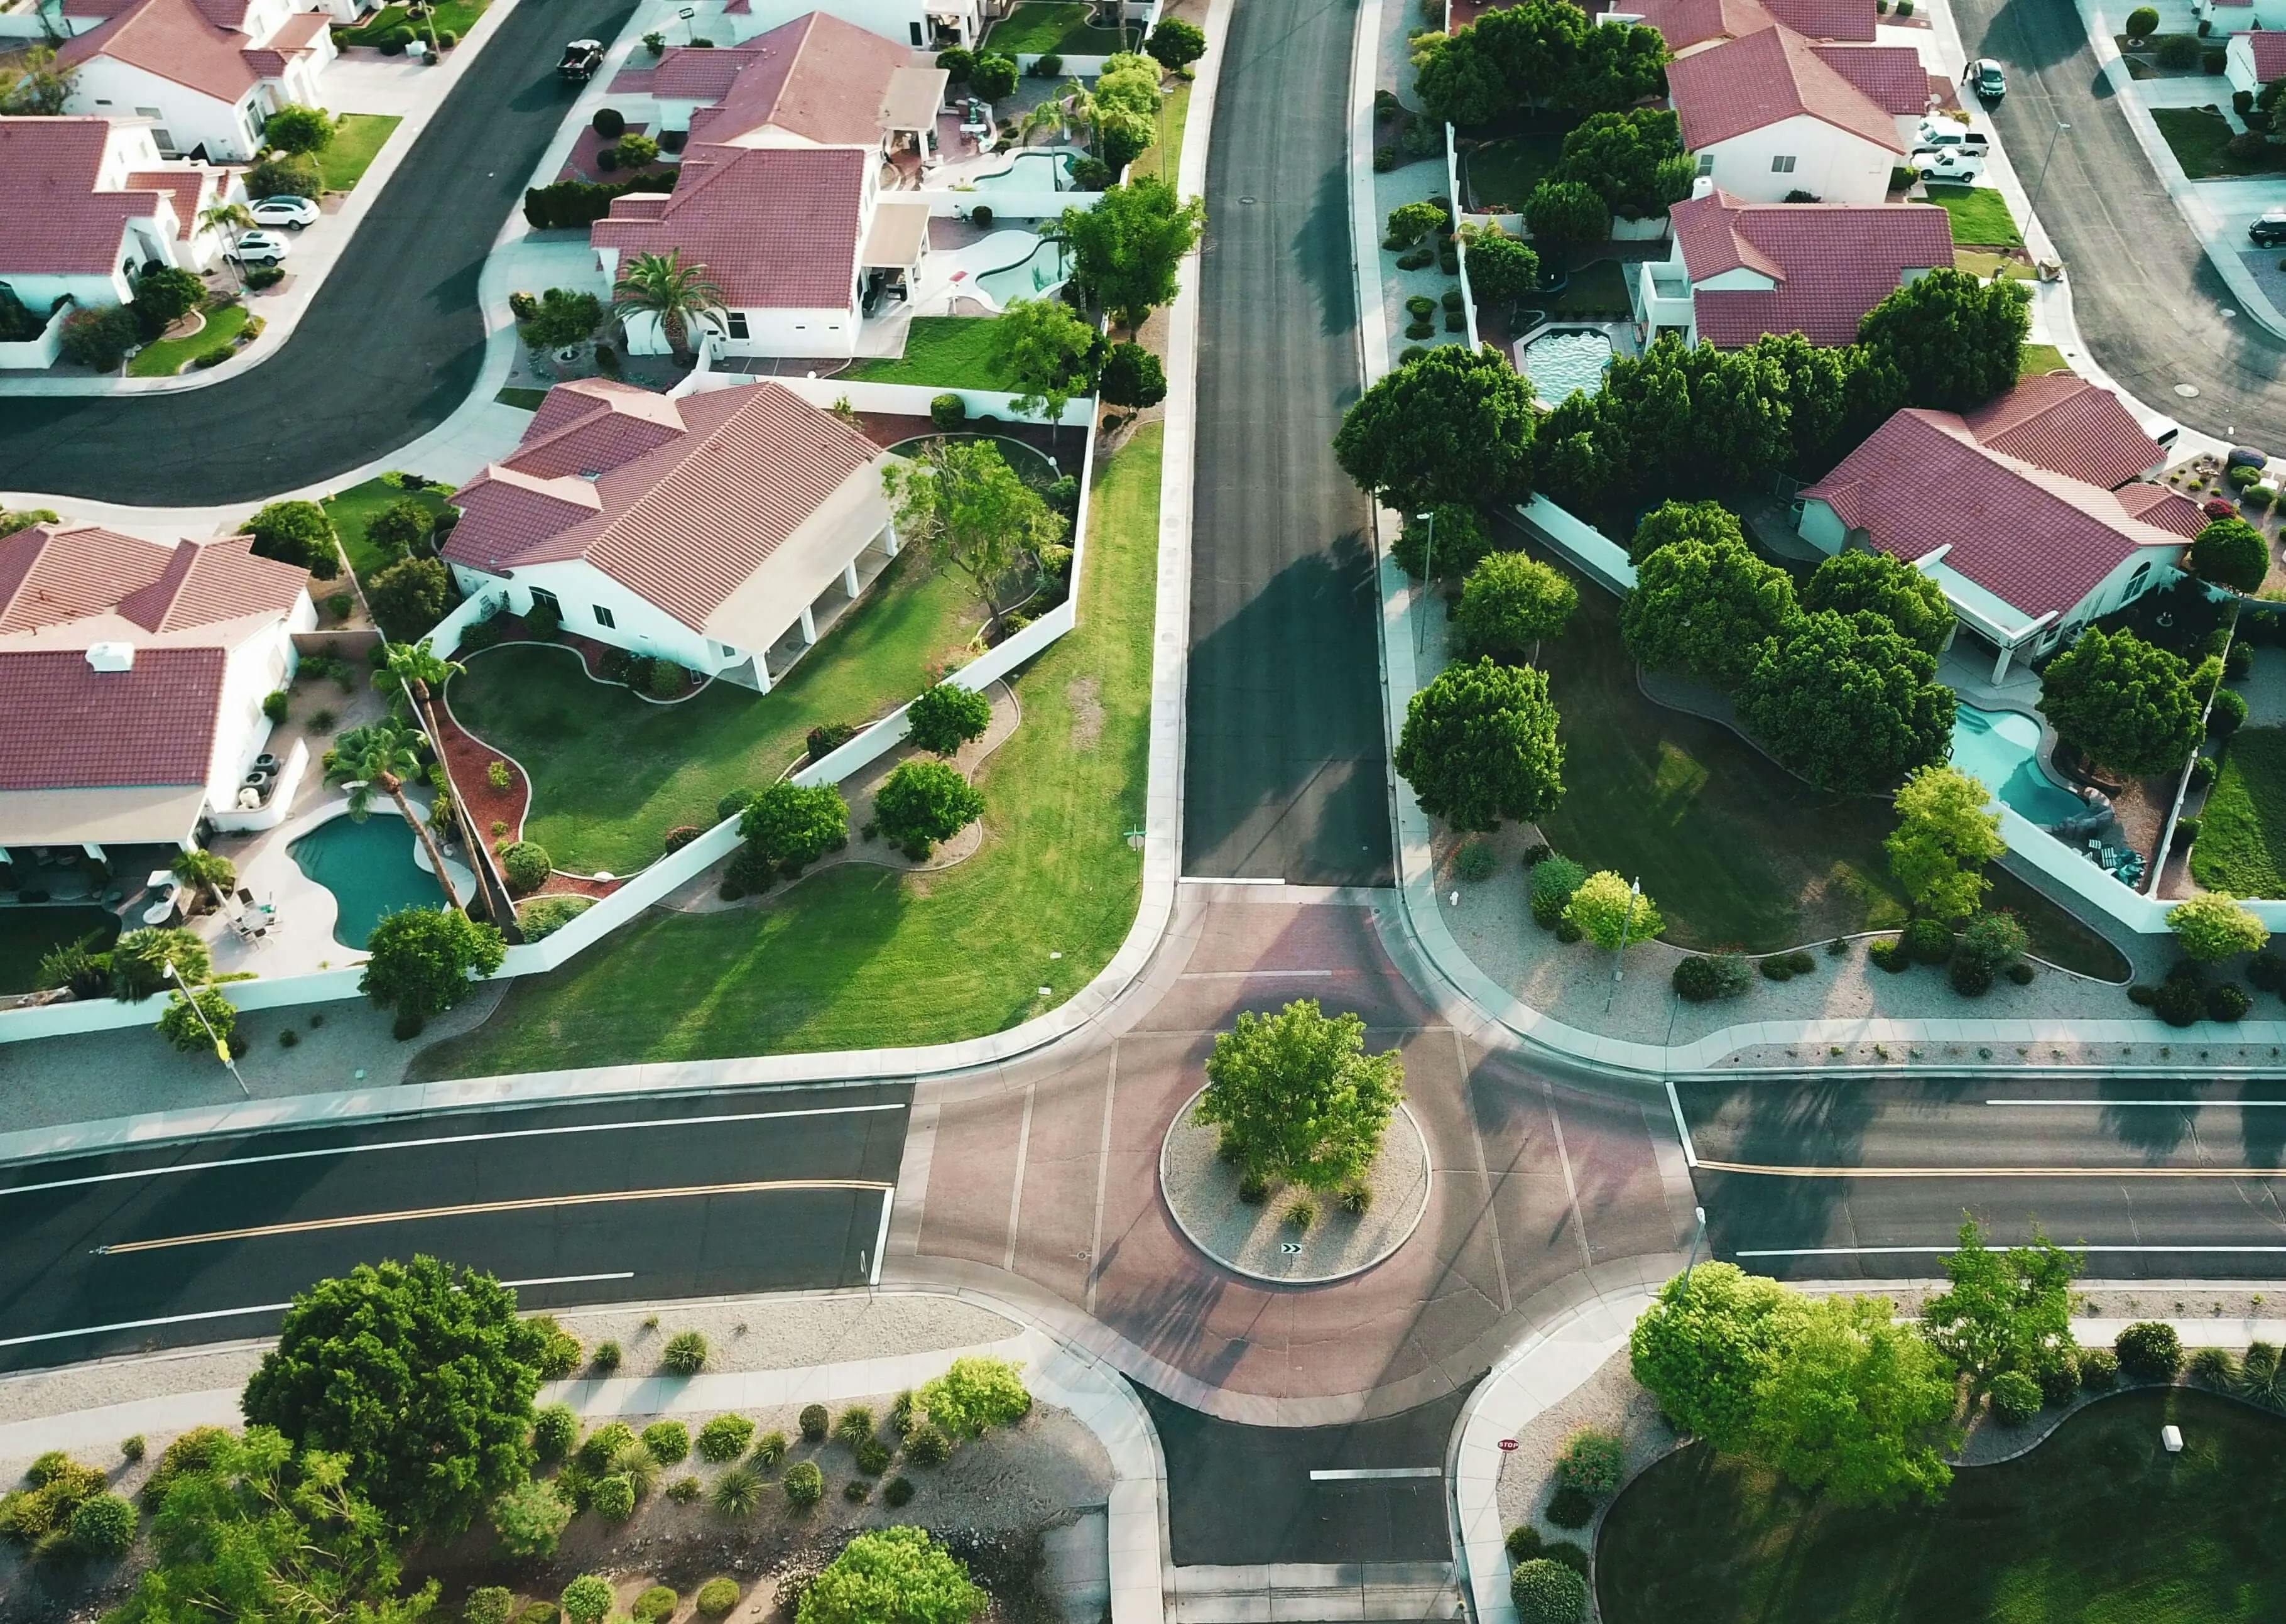 A roundabout in the middle of a residential area.